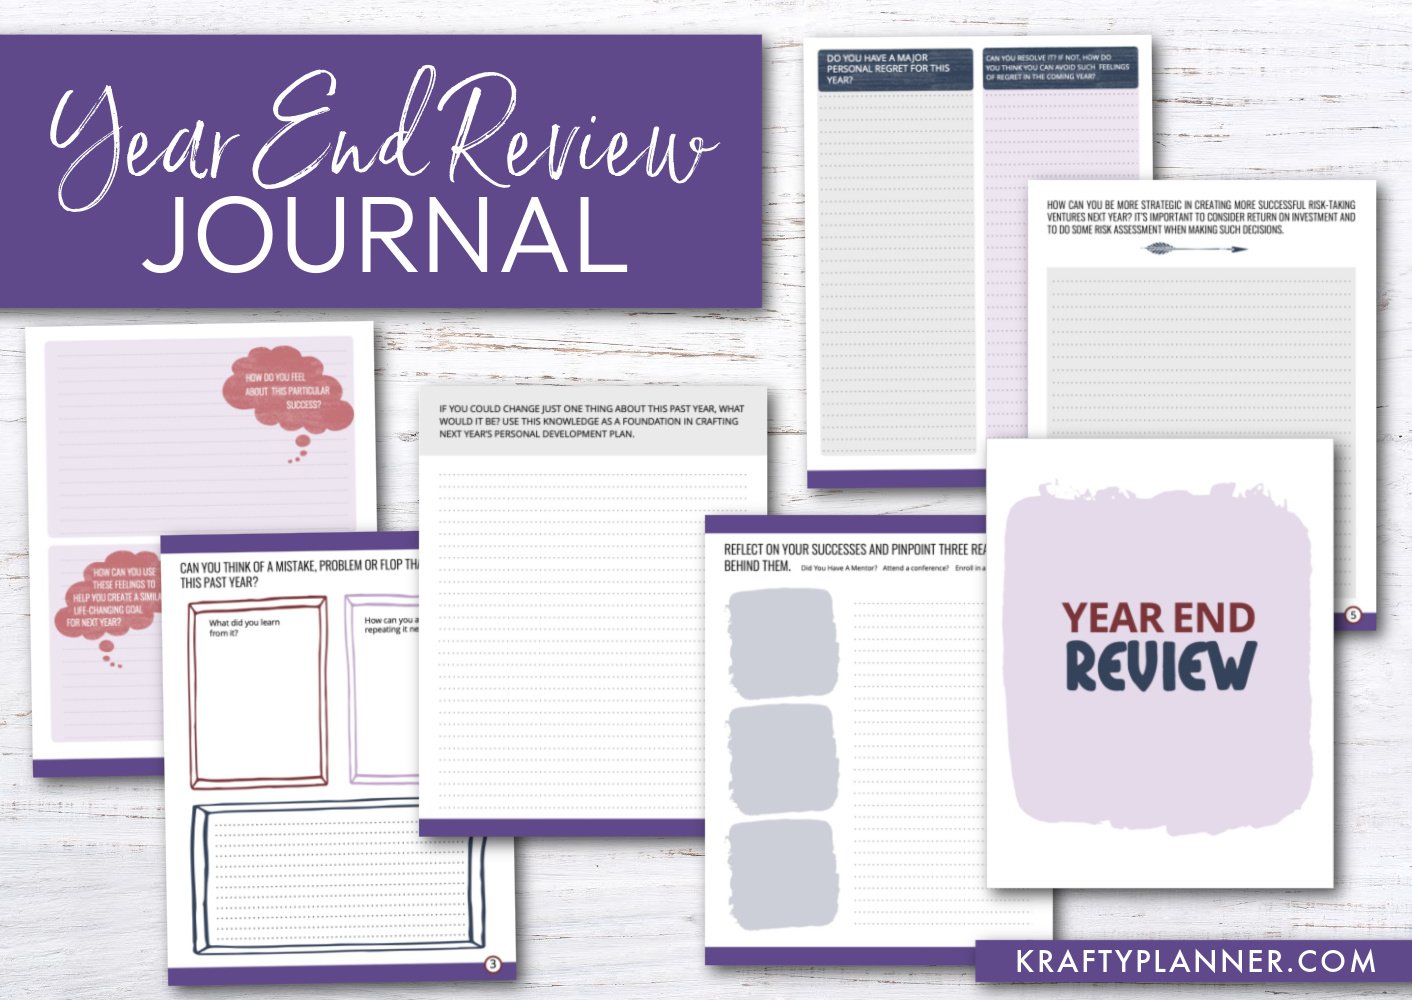 Self-Care Journal Kit  Download Self-Care Prompts, Stickers